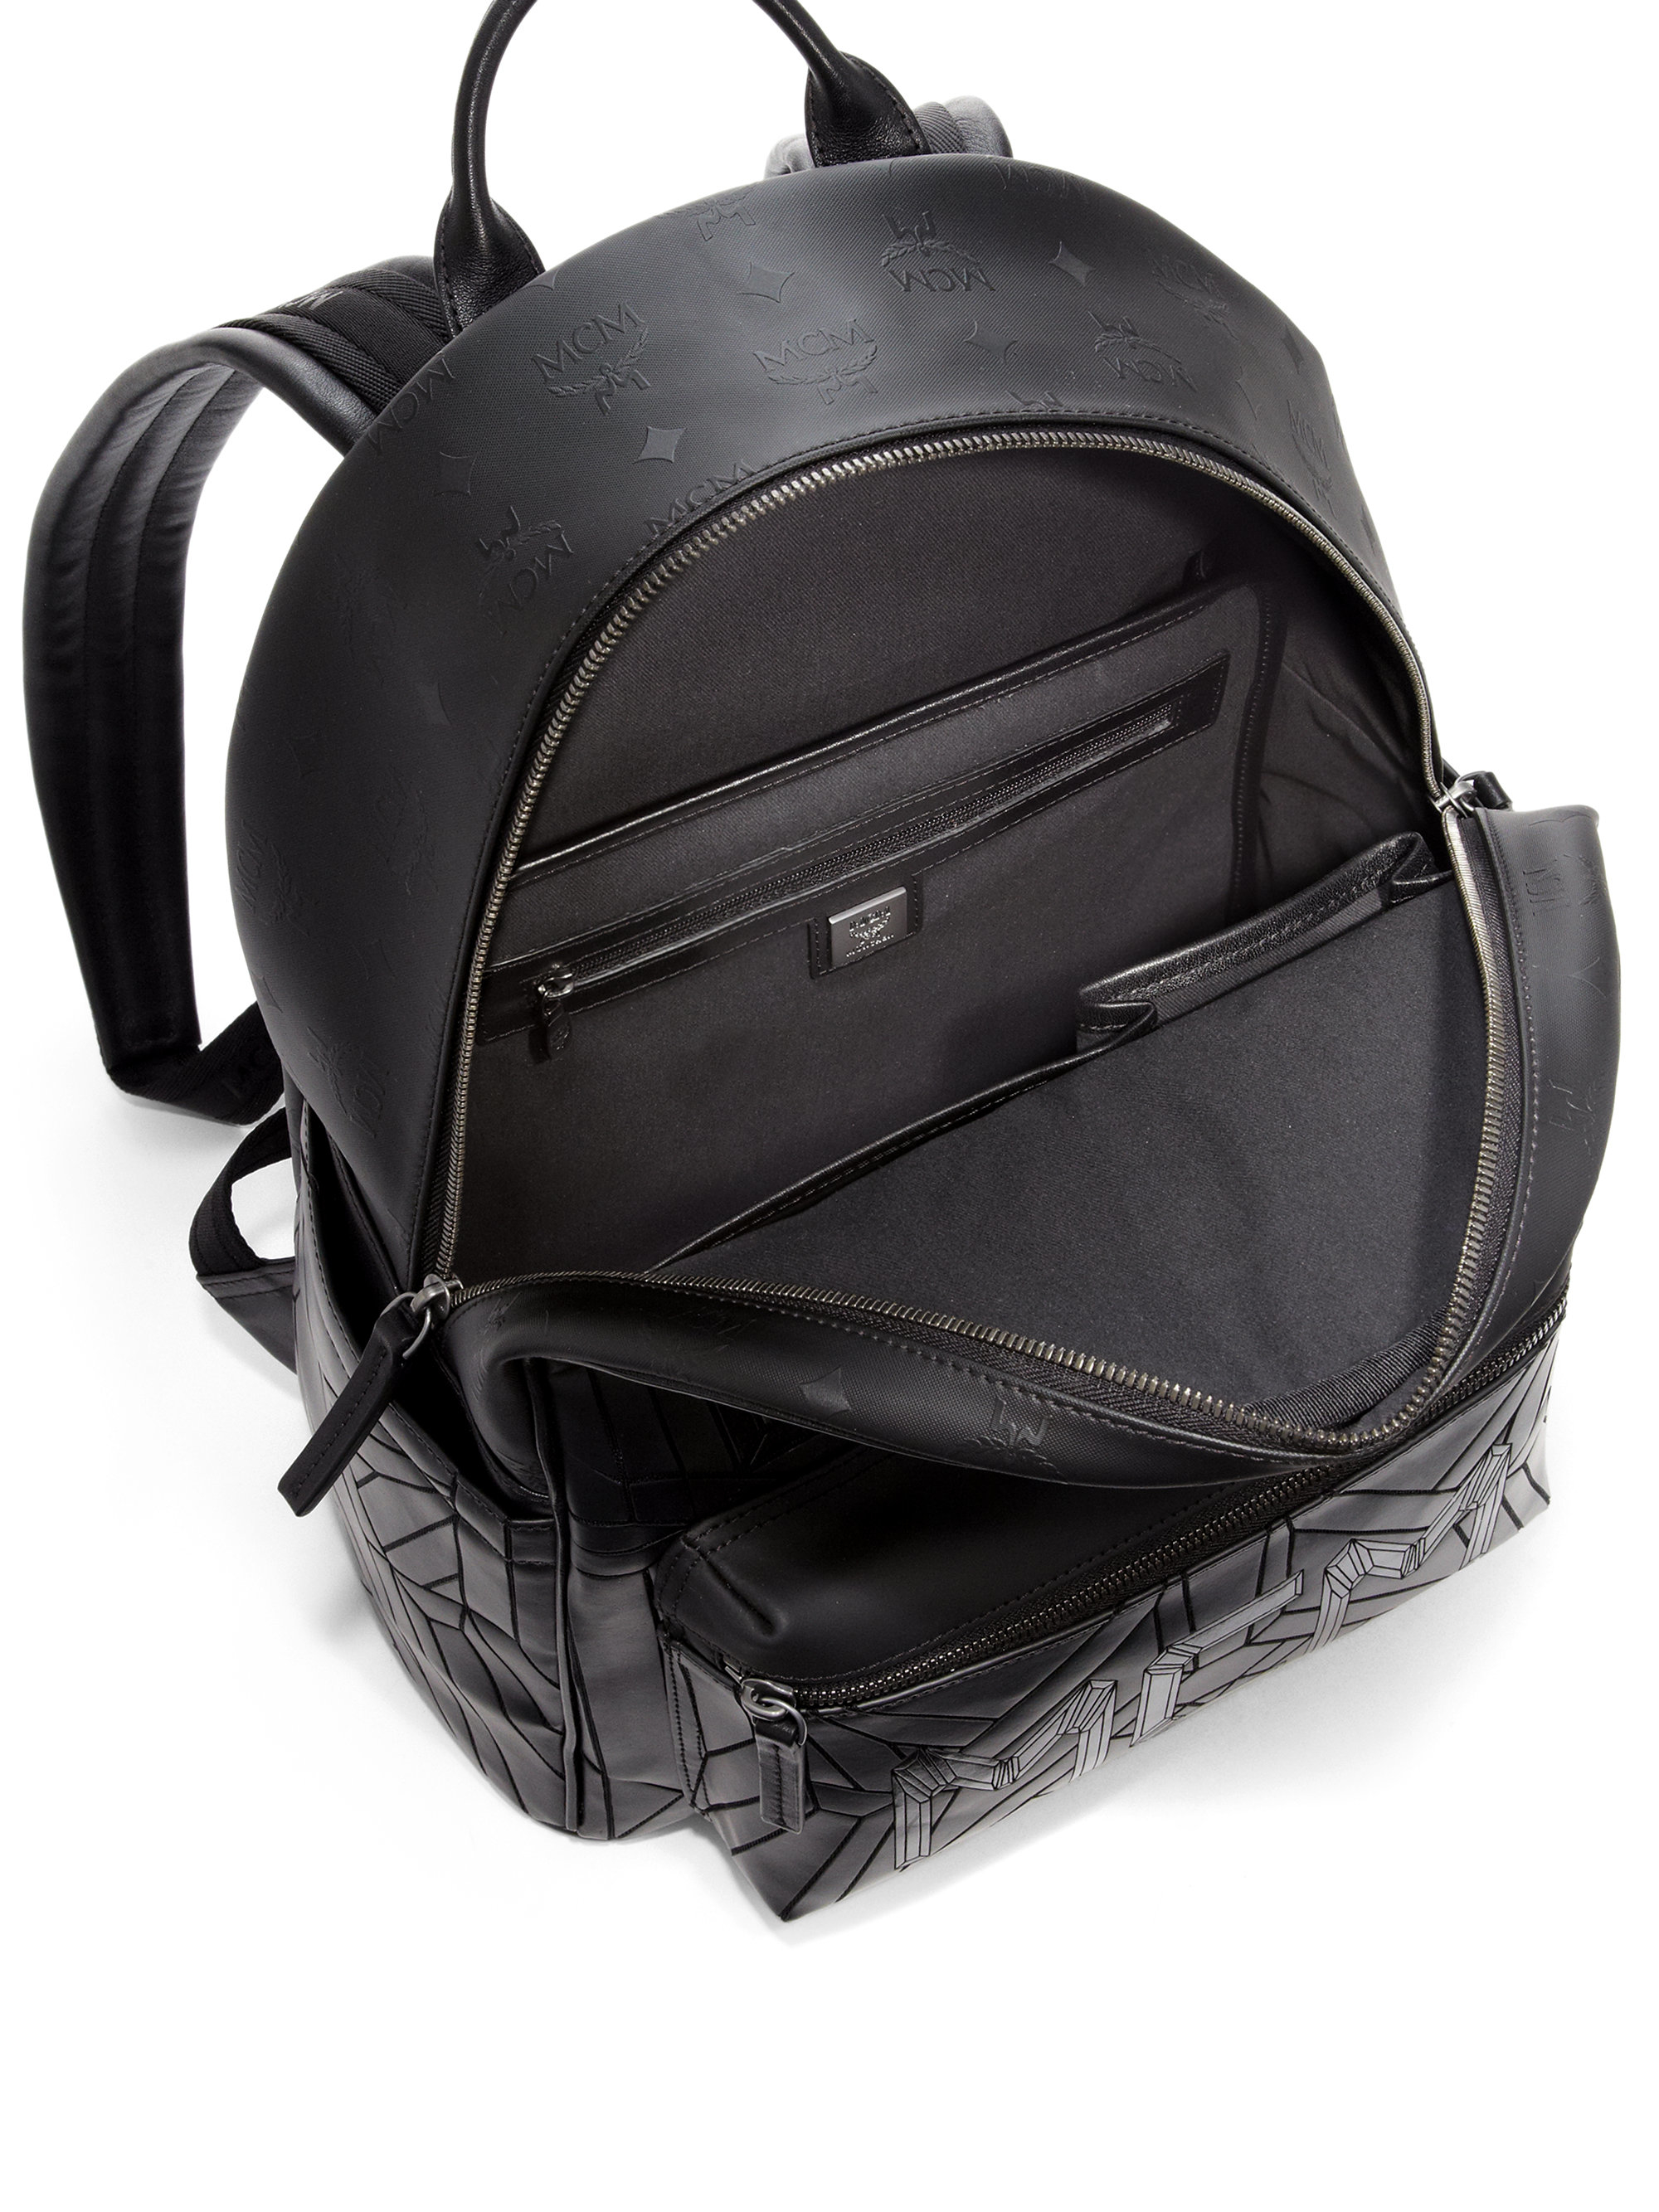 Lyst - Mcm Bionic Medium Faux Leather Backpack in Black for Men